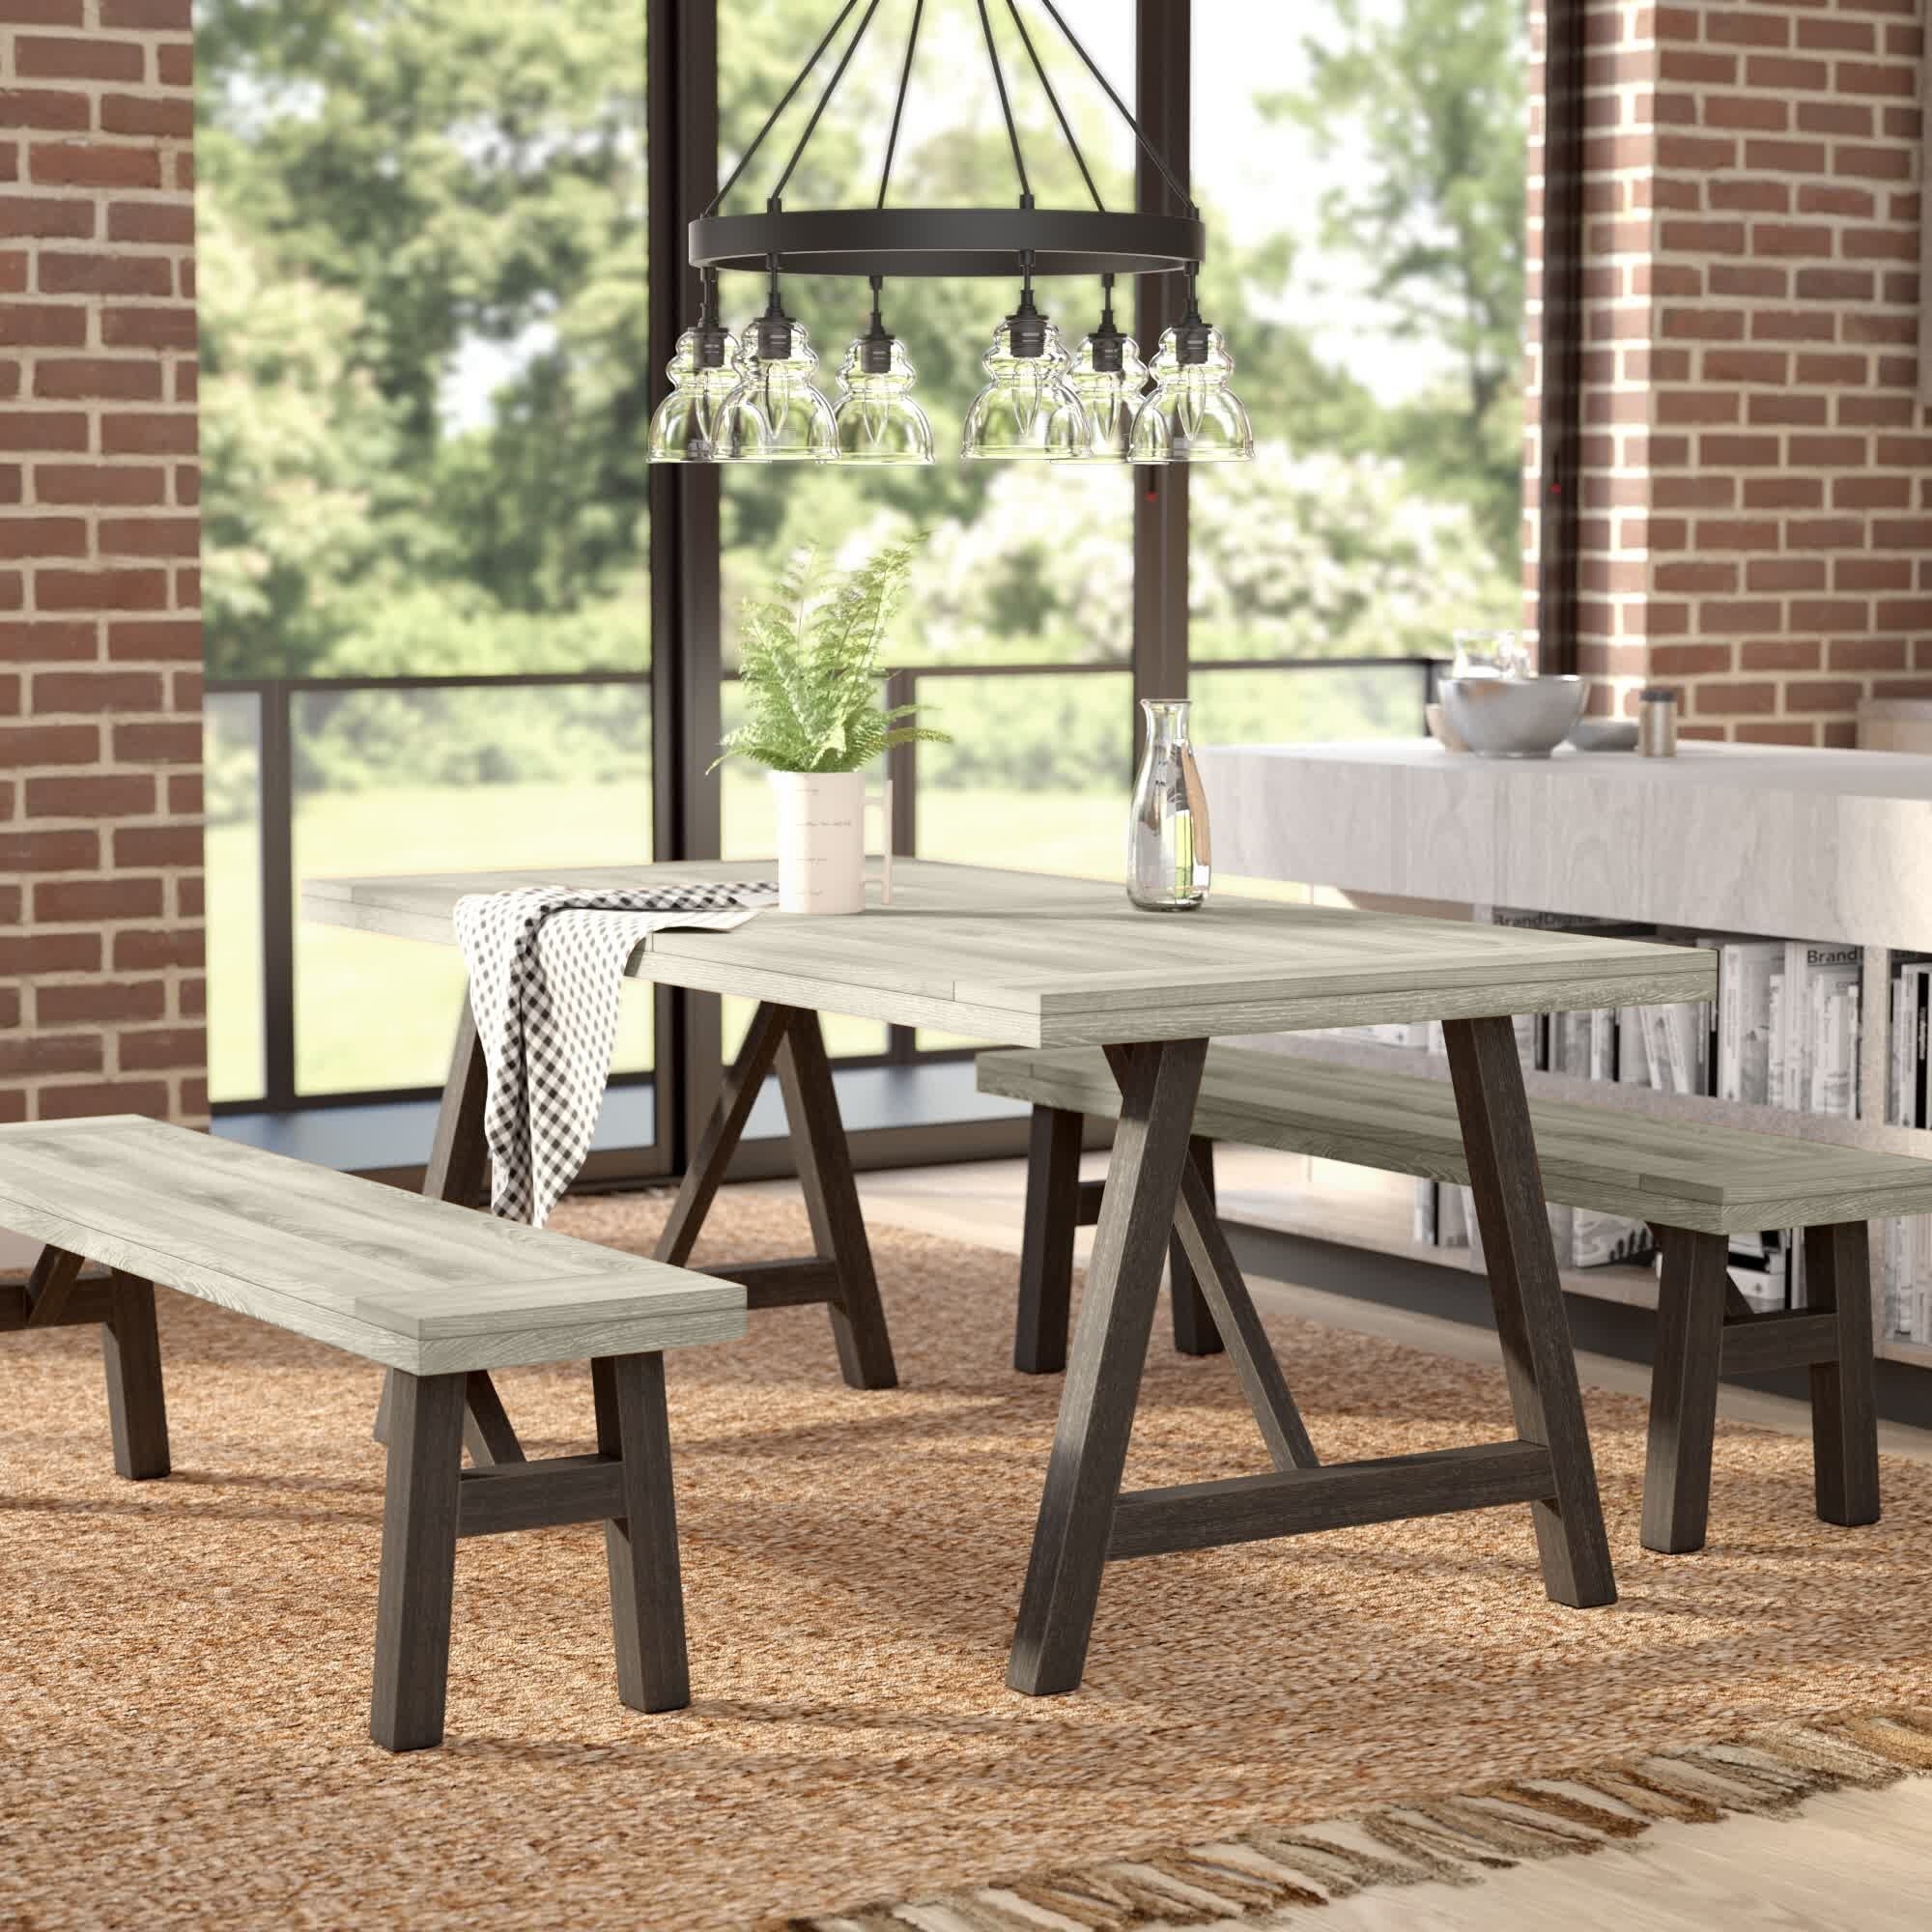 The dining set in the color Light Gray